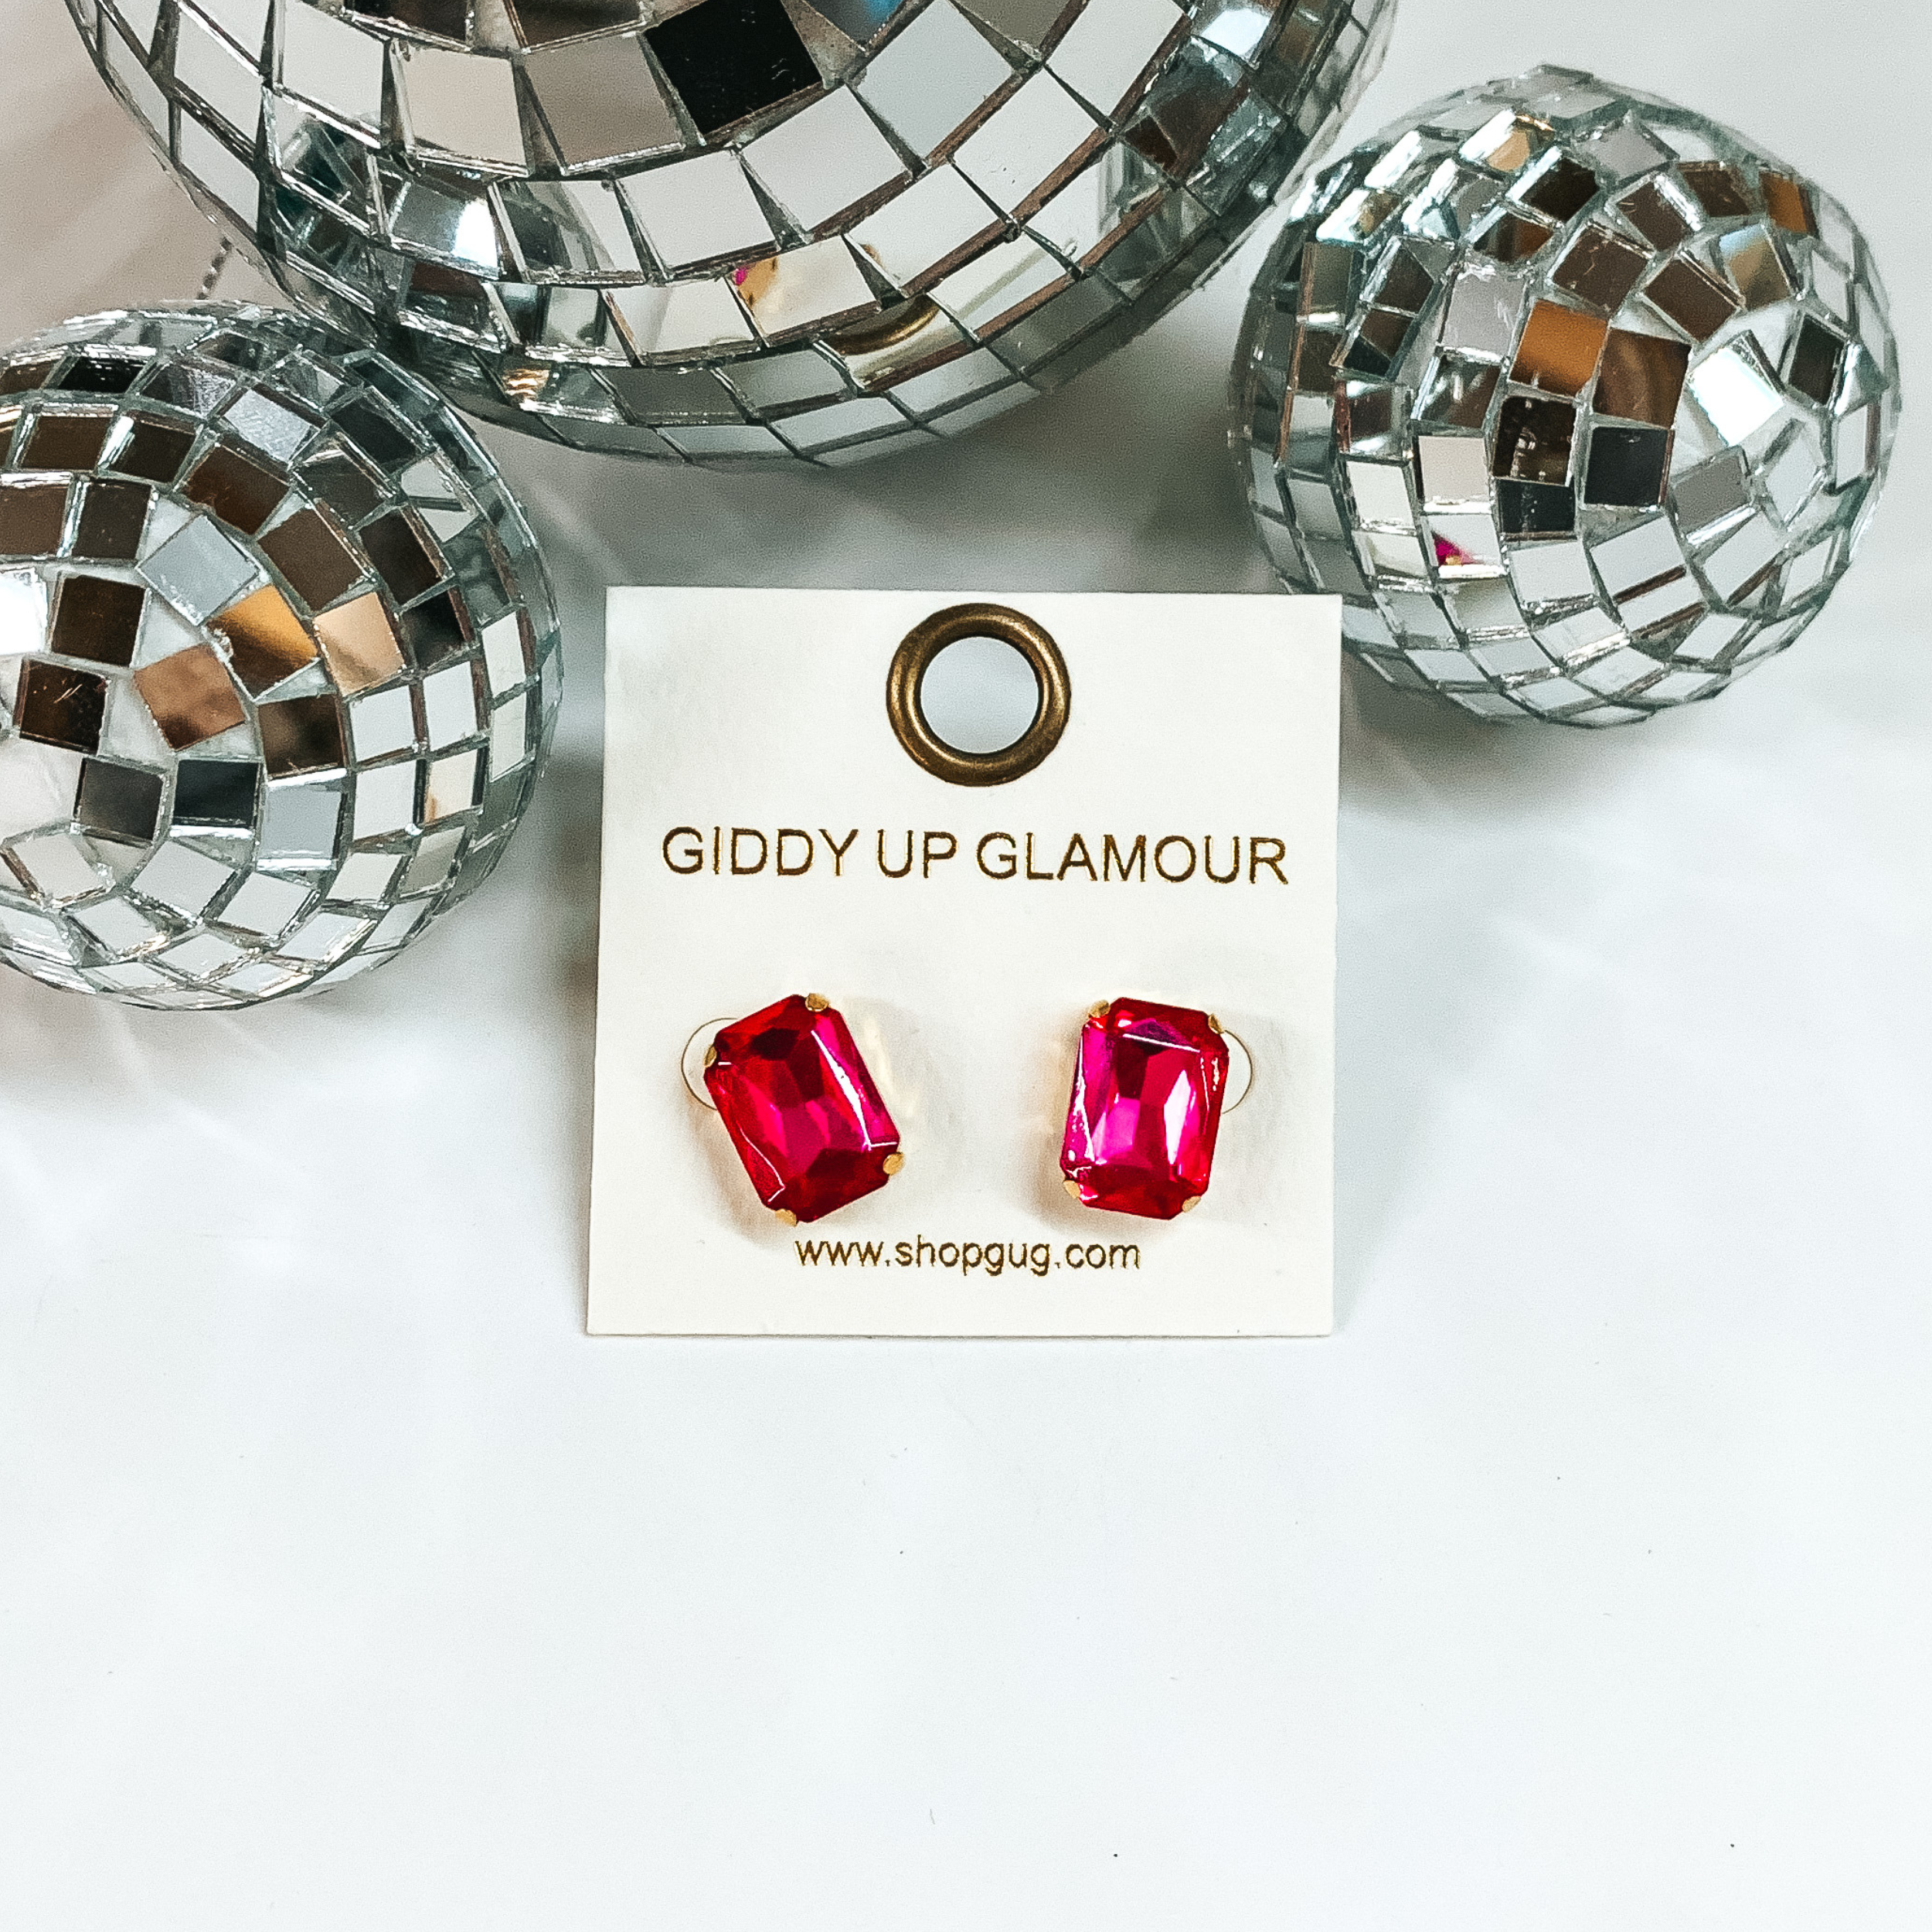 These stunning earrings add the perfect amount of sparkle. Earrings feature a hot pink rectangle crystal stone in a gold tone stud setting. Earrings are placed on a white background with silver disco balls at the top. 